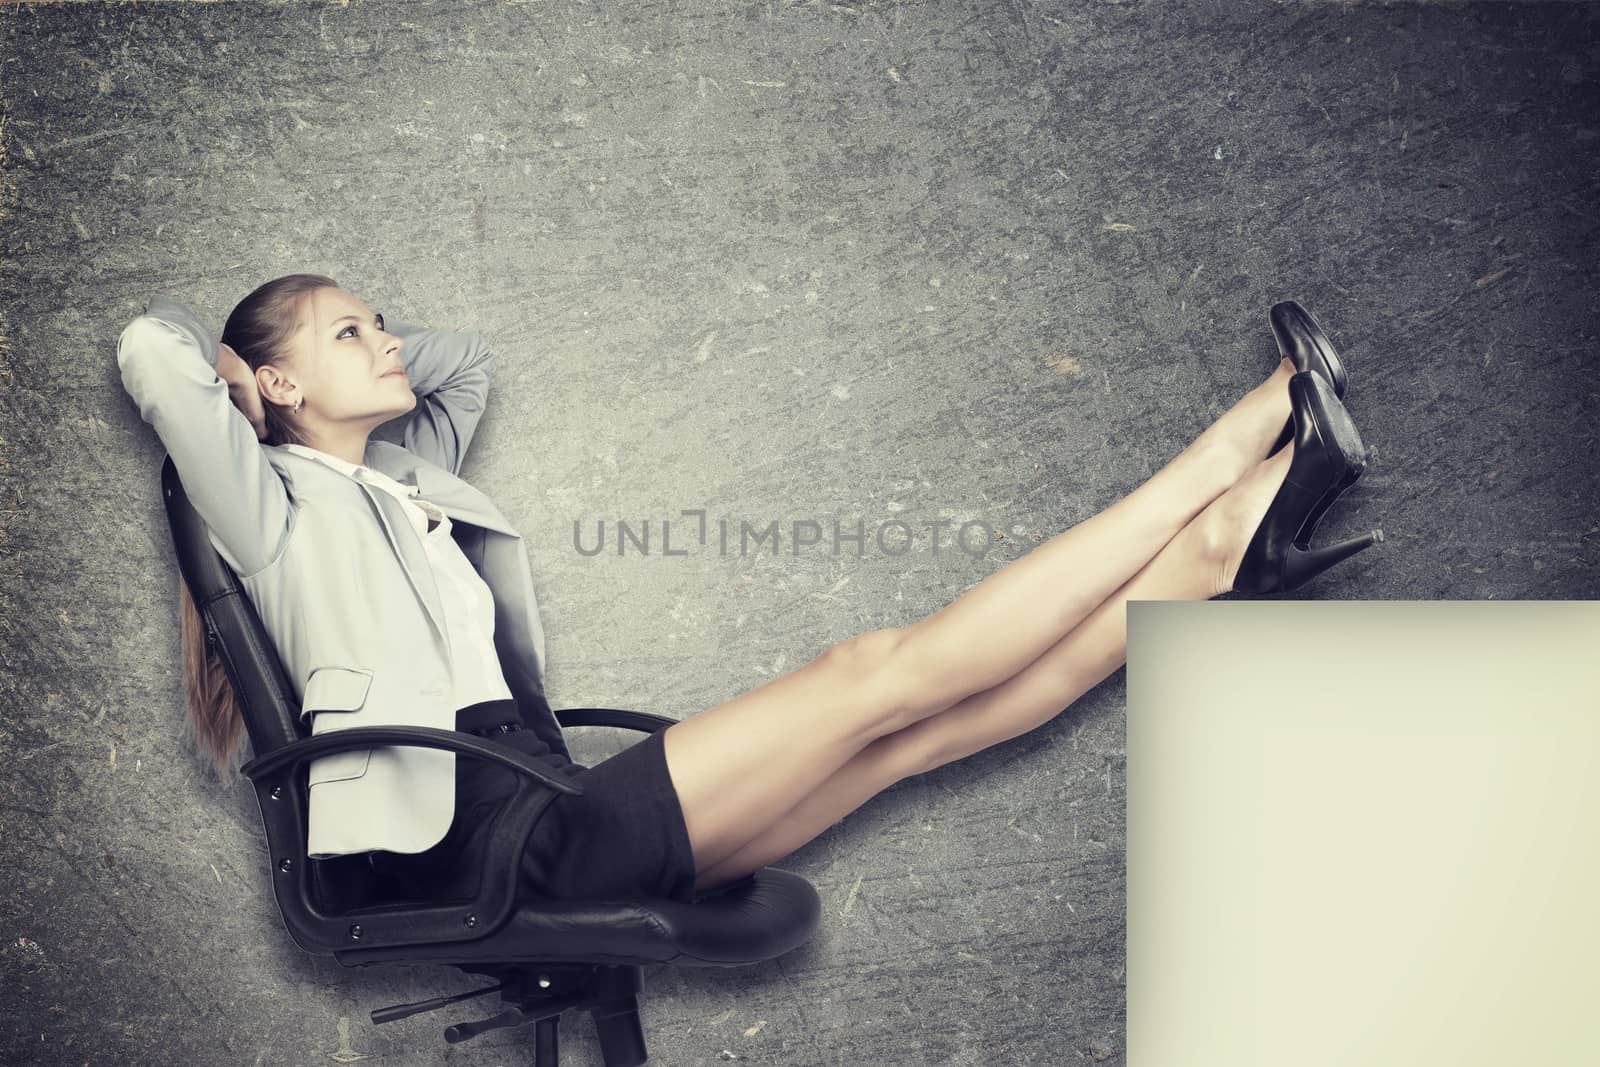 Businesswoman in office chair put her hands behind her head, with her feet up on anything, over grunge scratchy background